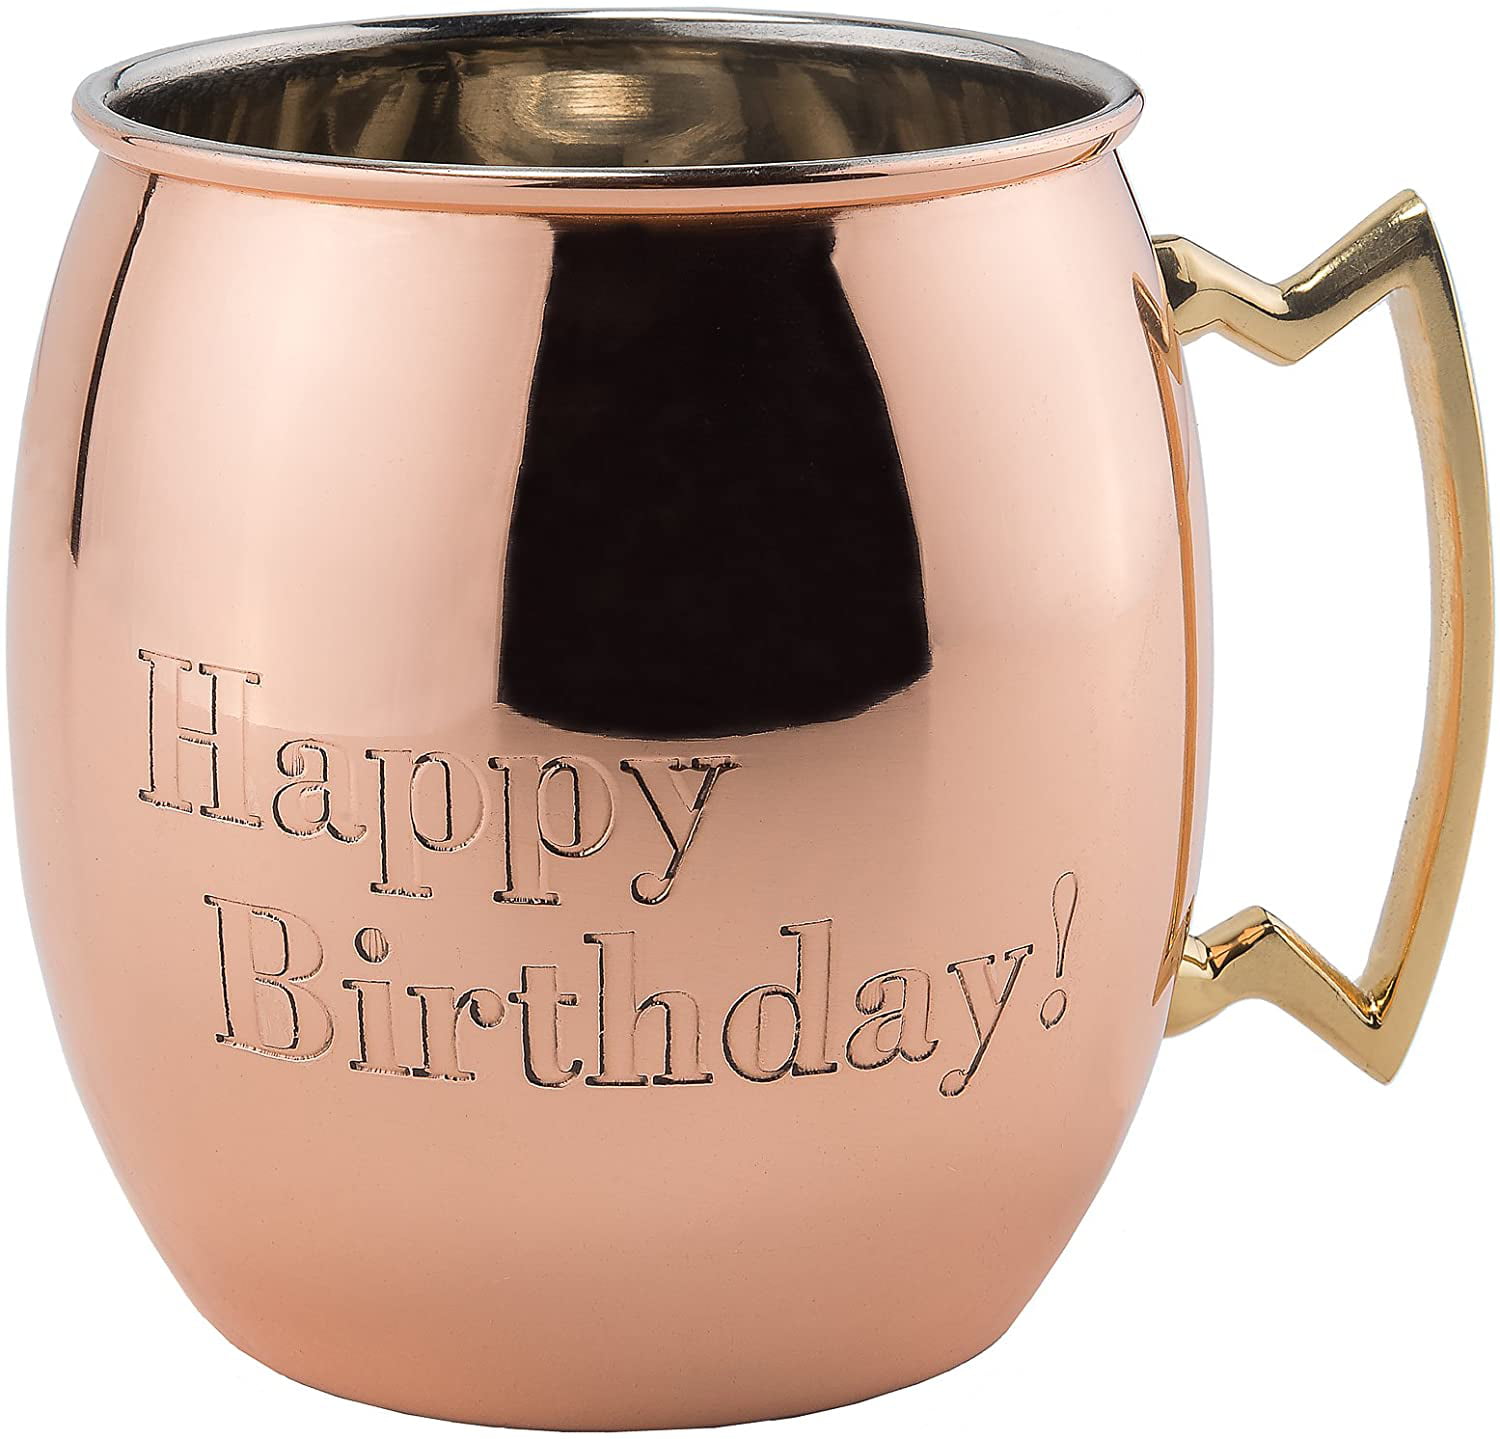 Monogrammed D Copper Old Dutch International Solid Moscow Mule Mug 16-Ounce 